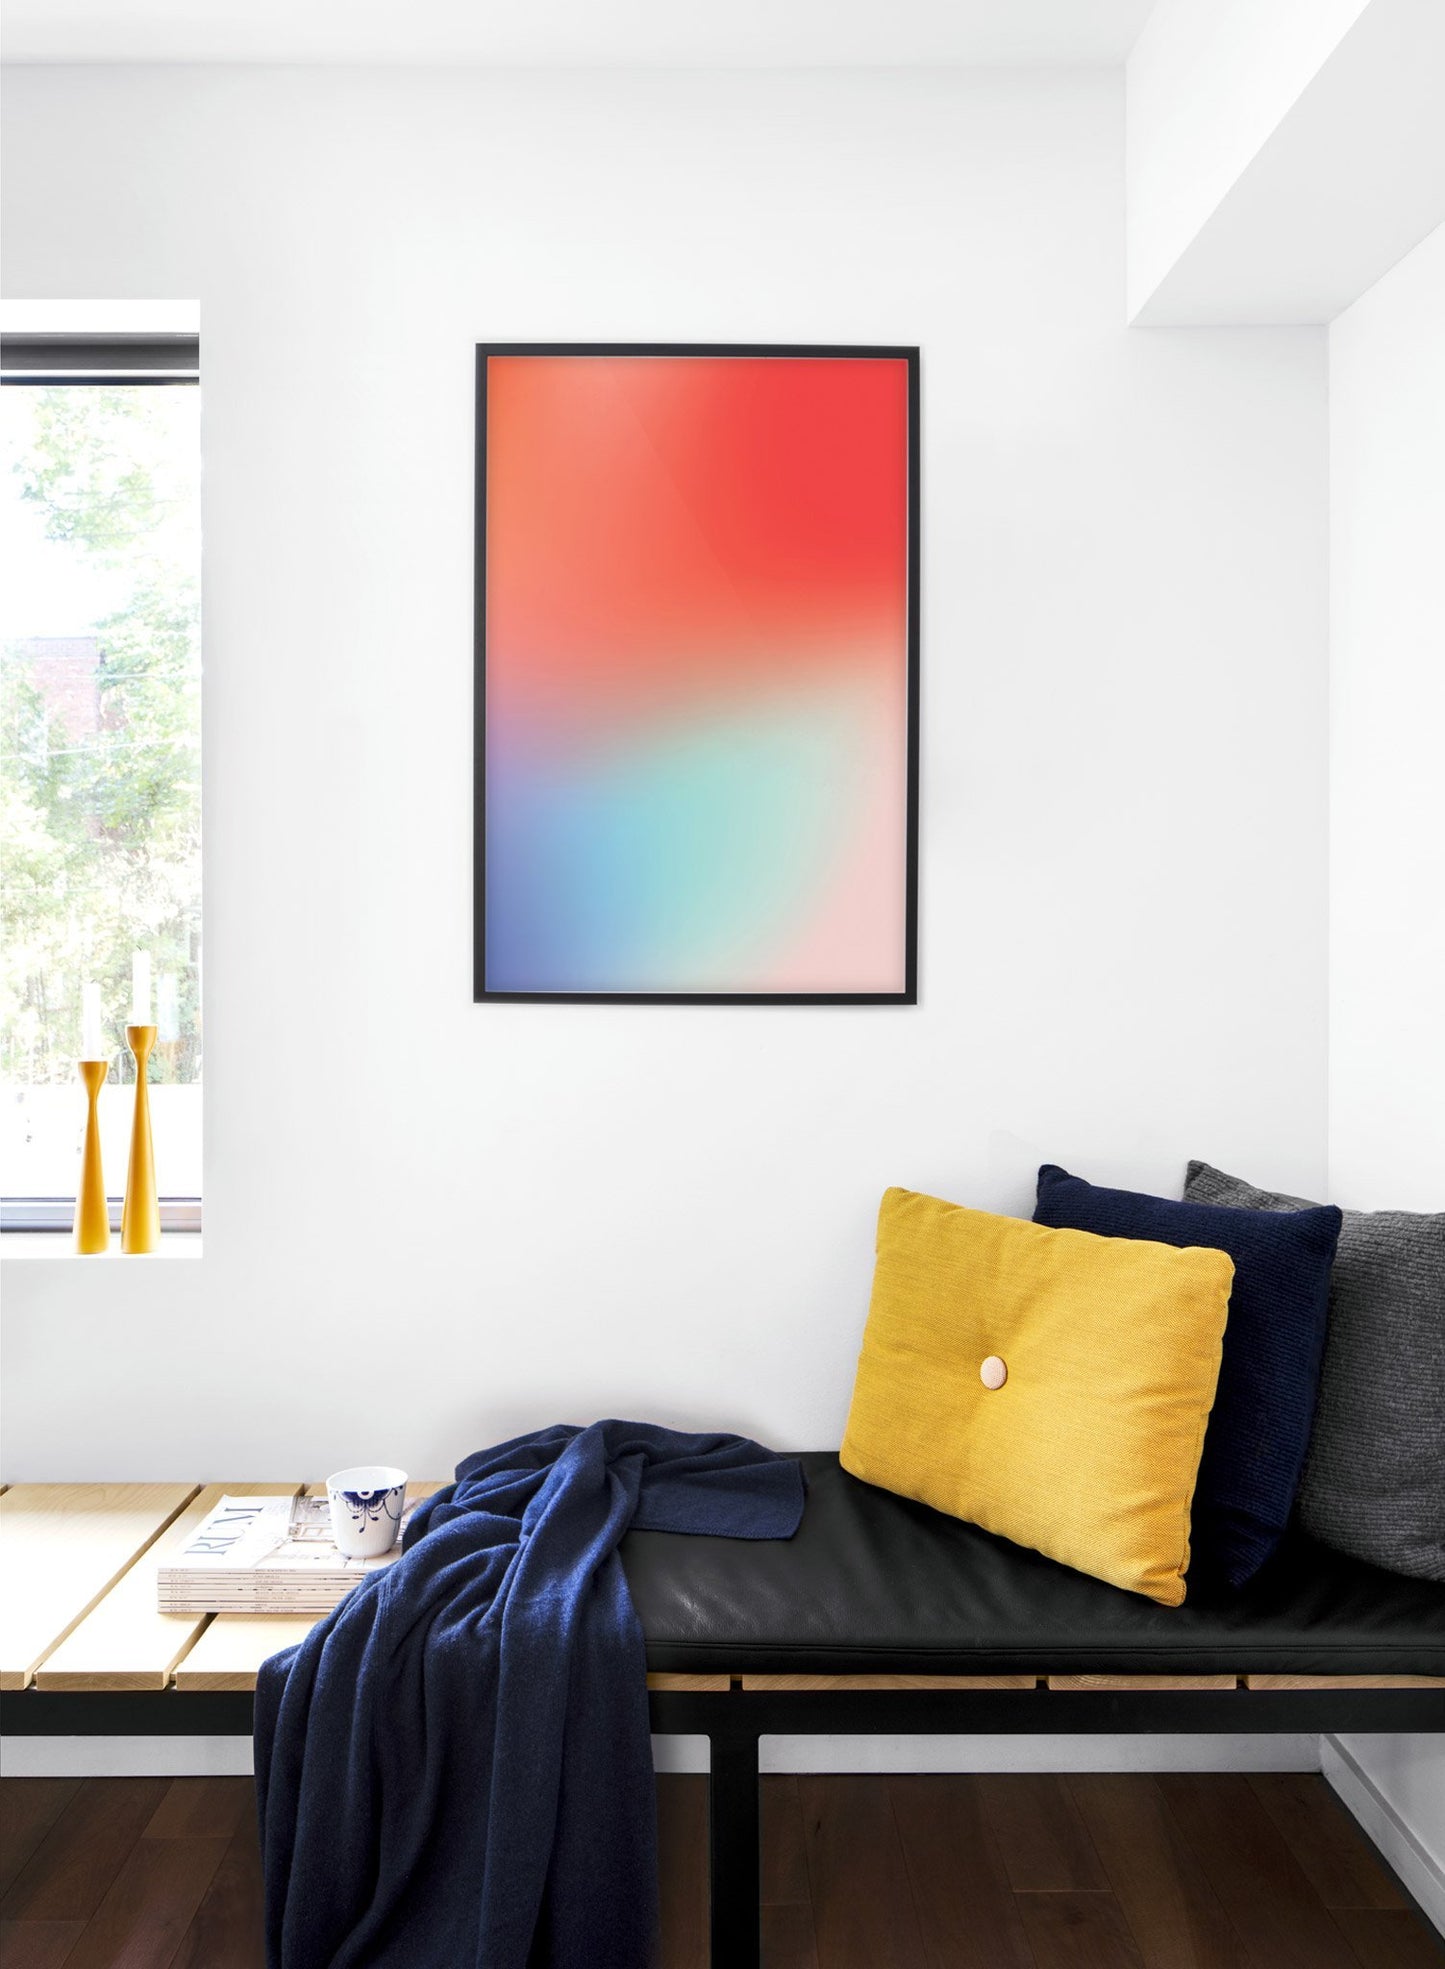 Cayenne modern minimalist abstract design poster by Opposite Wall - Bedroom